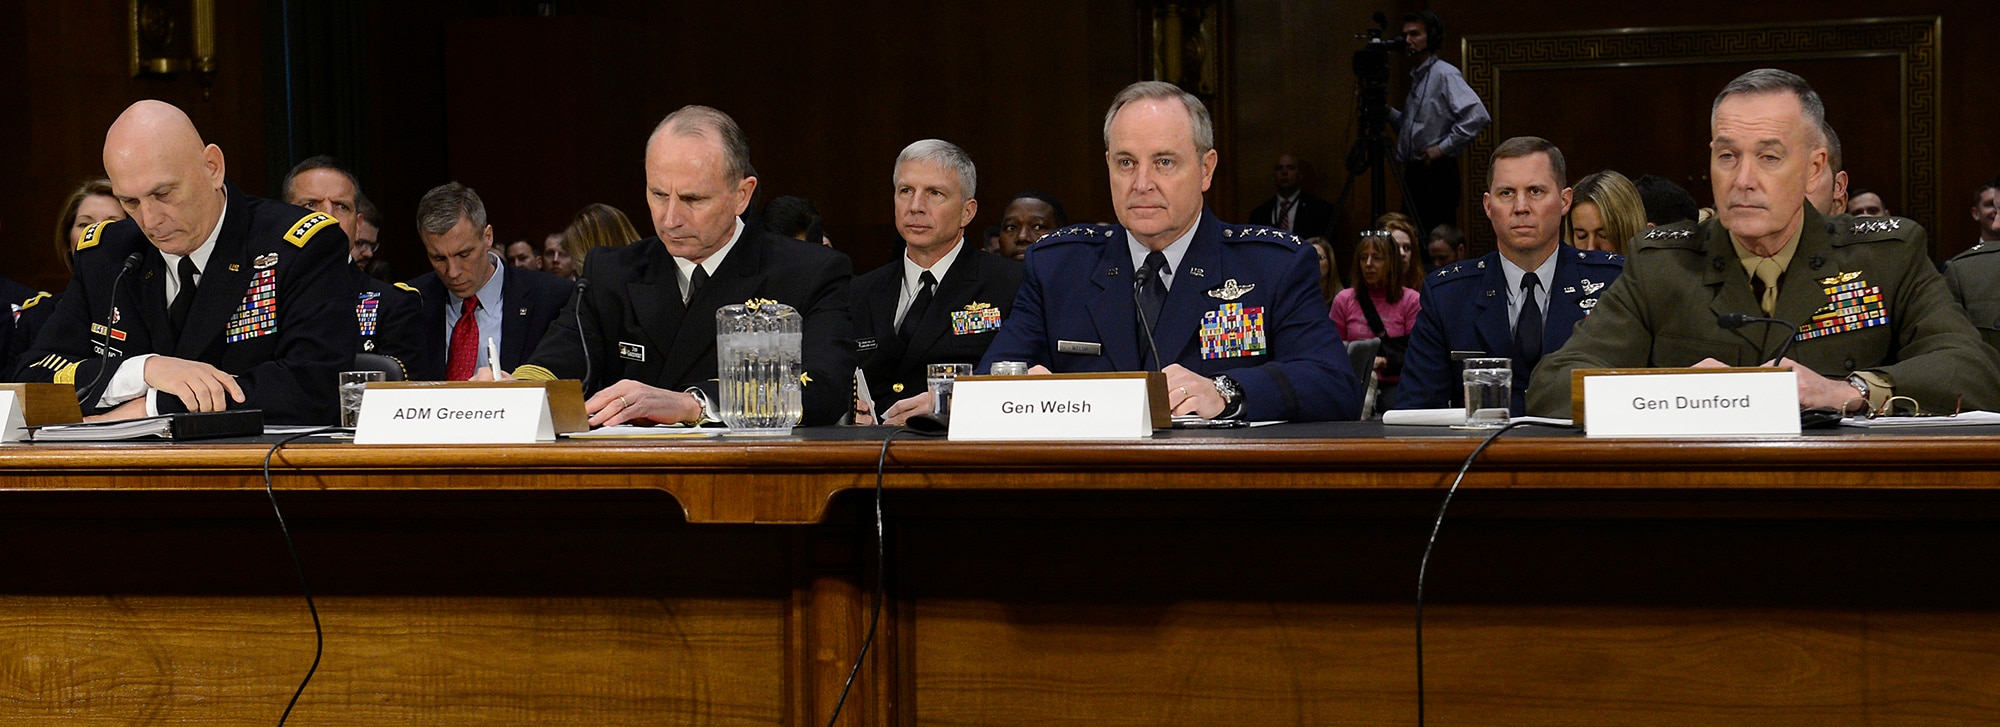 Air Force Chief of Staff Gen. Mark A. Welsh III testifies before the Senate Armed Services Committee Jan. 28, 2015, in Washington, D.C. Welsh testified with fellow service leaders: Chief of Staff of the Army Gen. Raymond Odierno, Chief of Naval Operations Adm. Jonathan W. Greenert and Commandant of the Marine Corps Gen. Joesph F. Dunford Jr. (U.S. Air Force photo/Scott M. Ash)